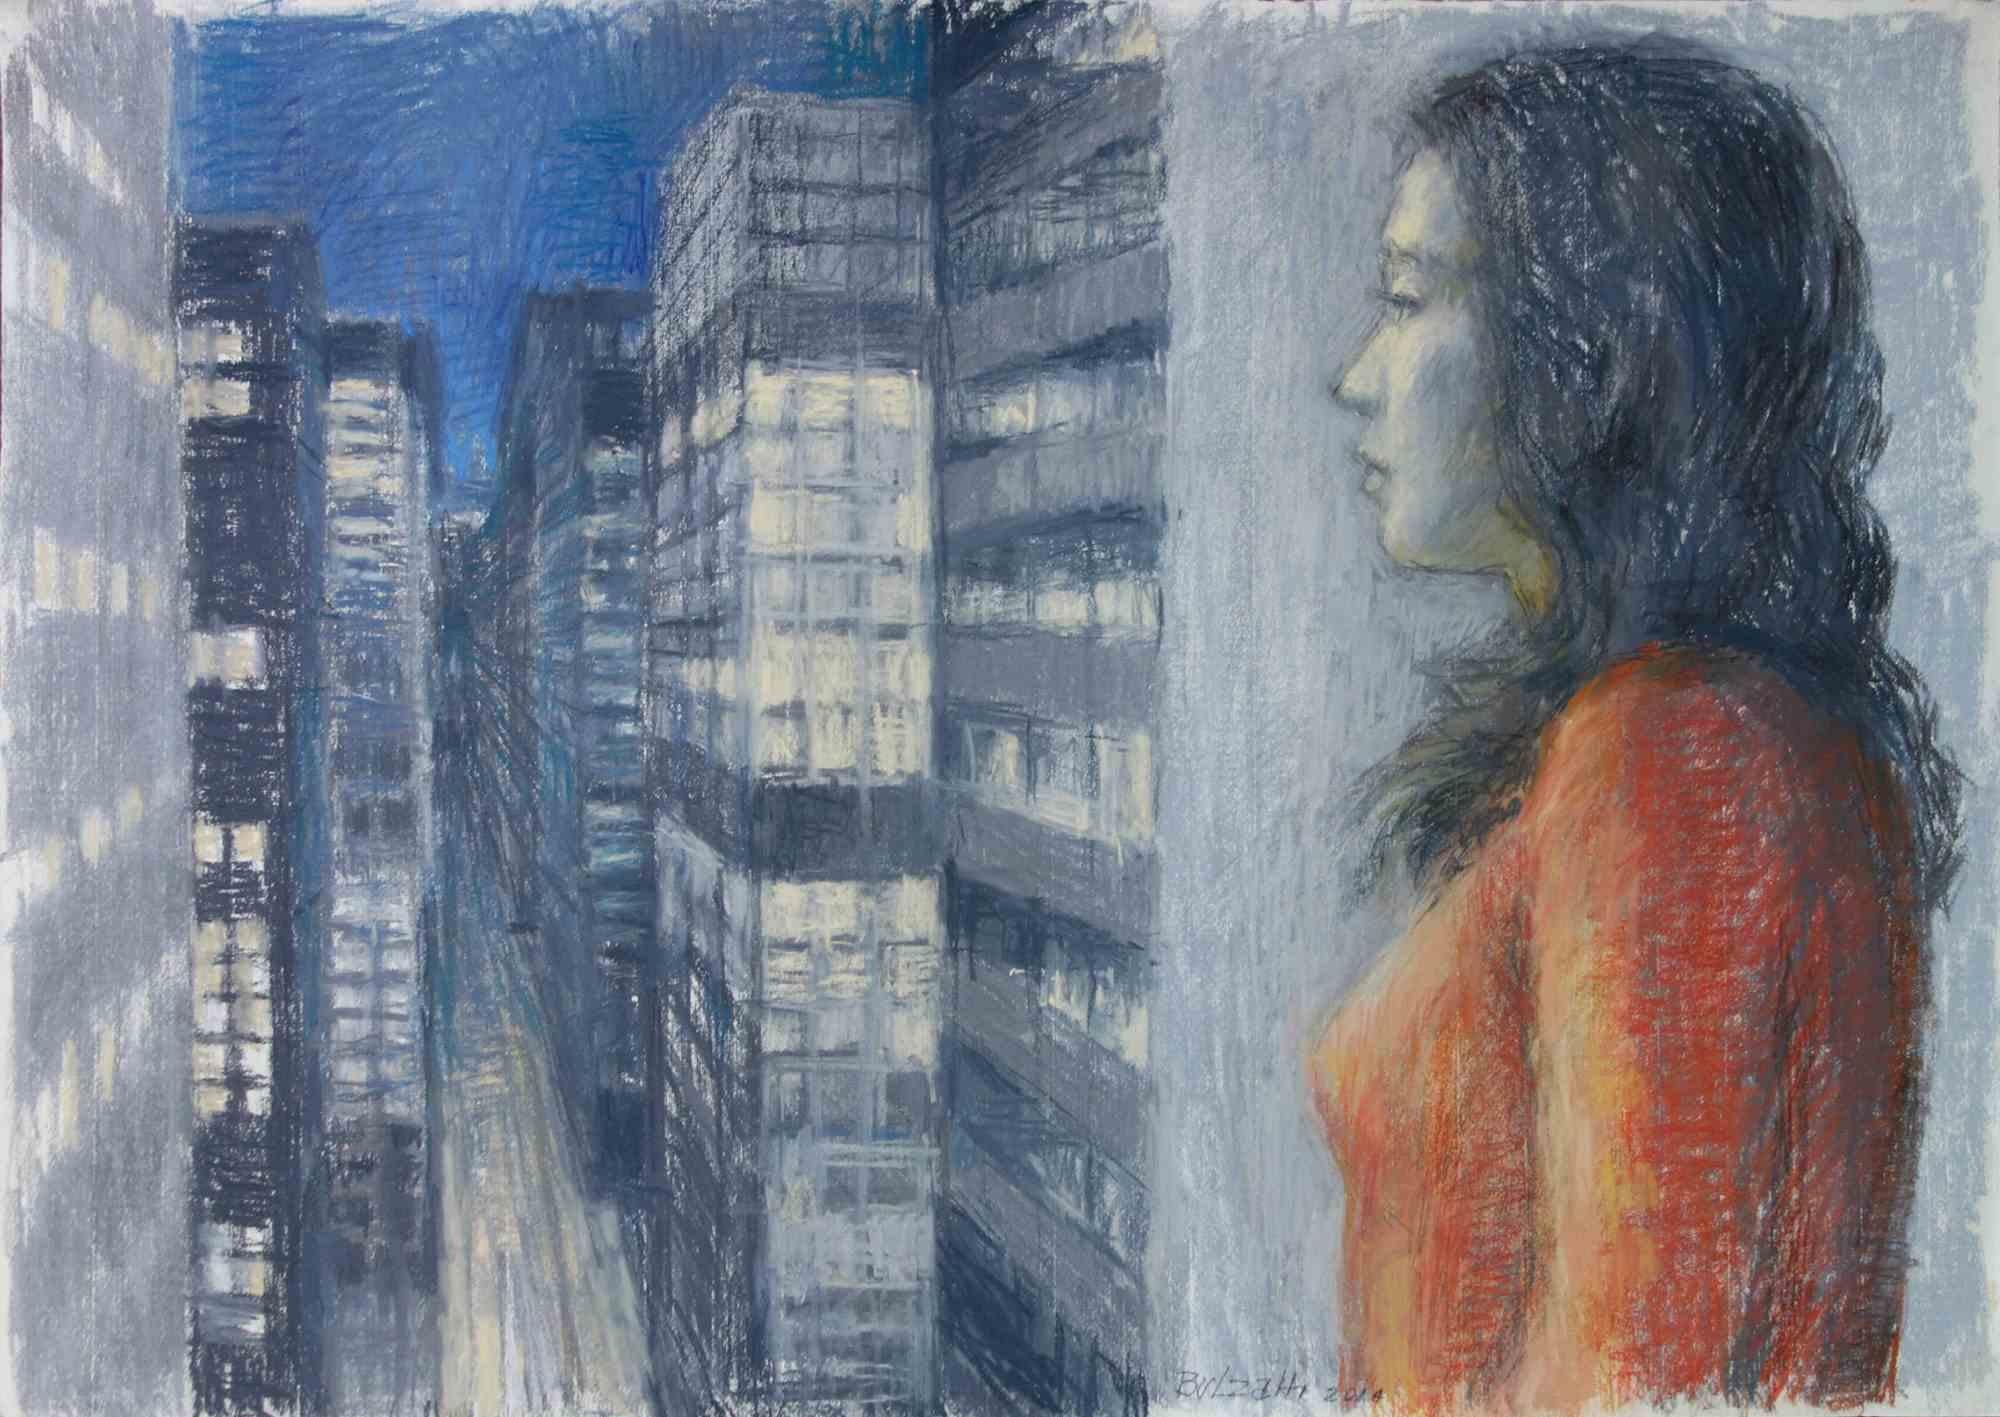 Donna Città is an original pastel on paper realized by the Italian contemporary artist Aurelio Bulzatti in 2014.

Original and unique piece hand-drawn, hand-signed, and dated pastel on paper.

Excellent conditions.

Donna Città, literally,